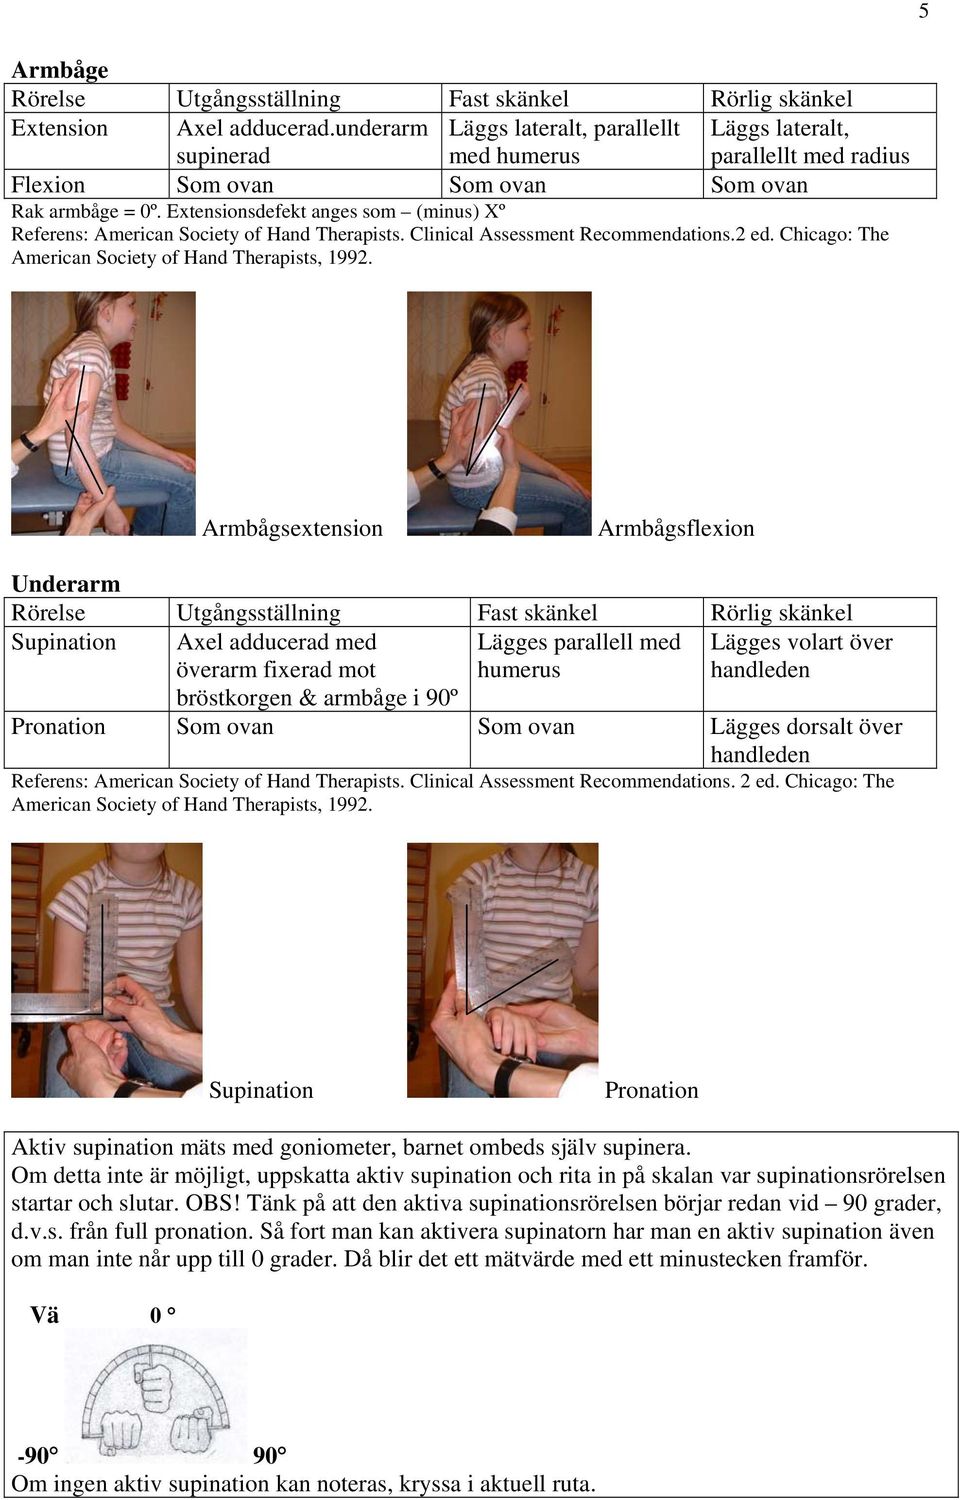 Extensionsdefekt anges som (minus) Xº Referens: American Society of Hand Therapists. Clinical Assessment Recommendations.2 ed. Chicago: The American Society of Hand Therapists, 1992.